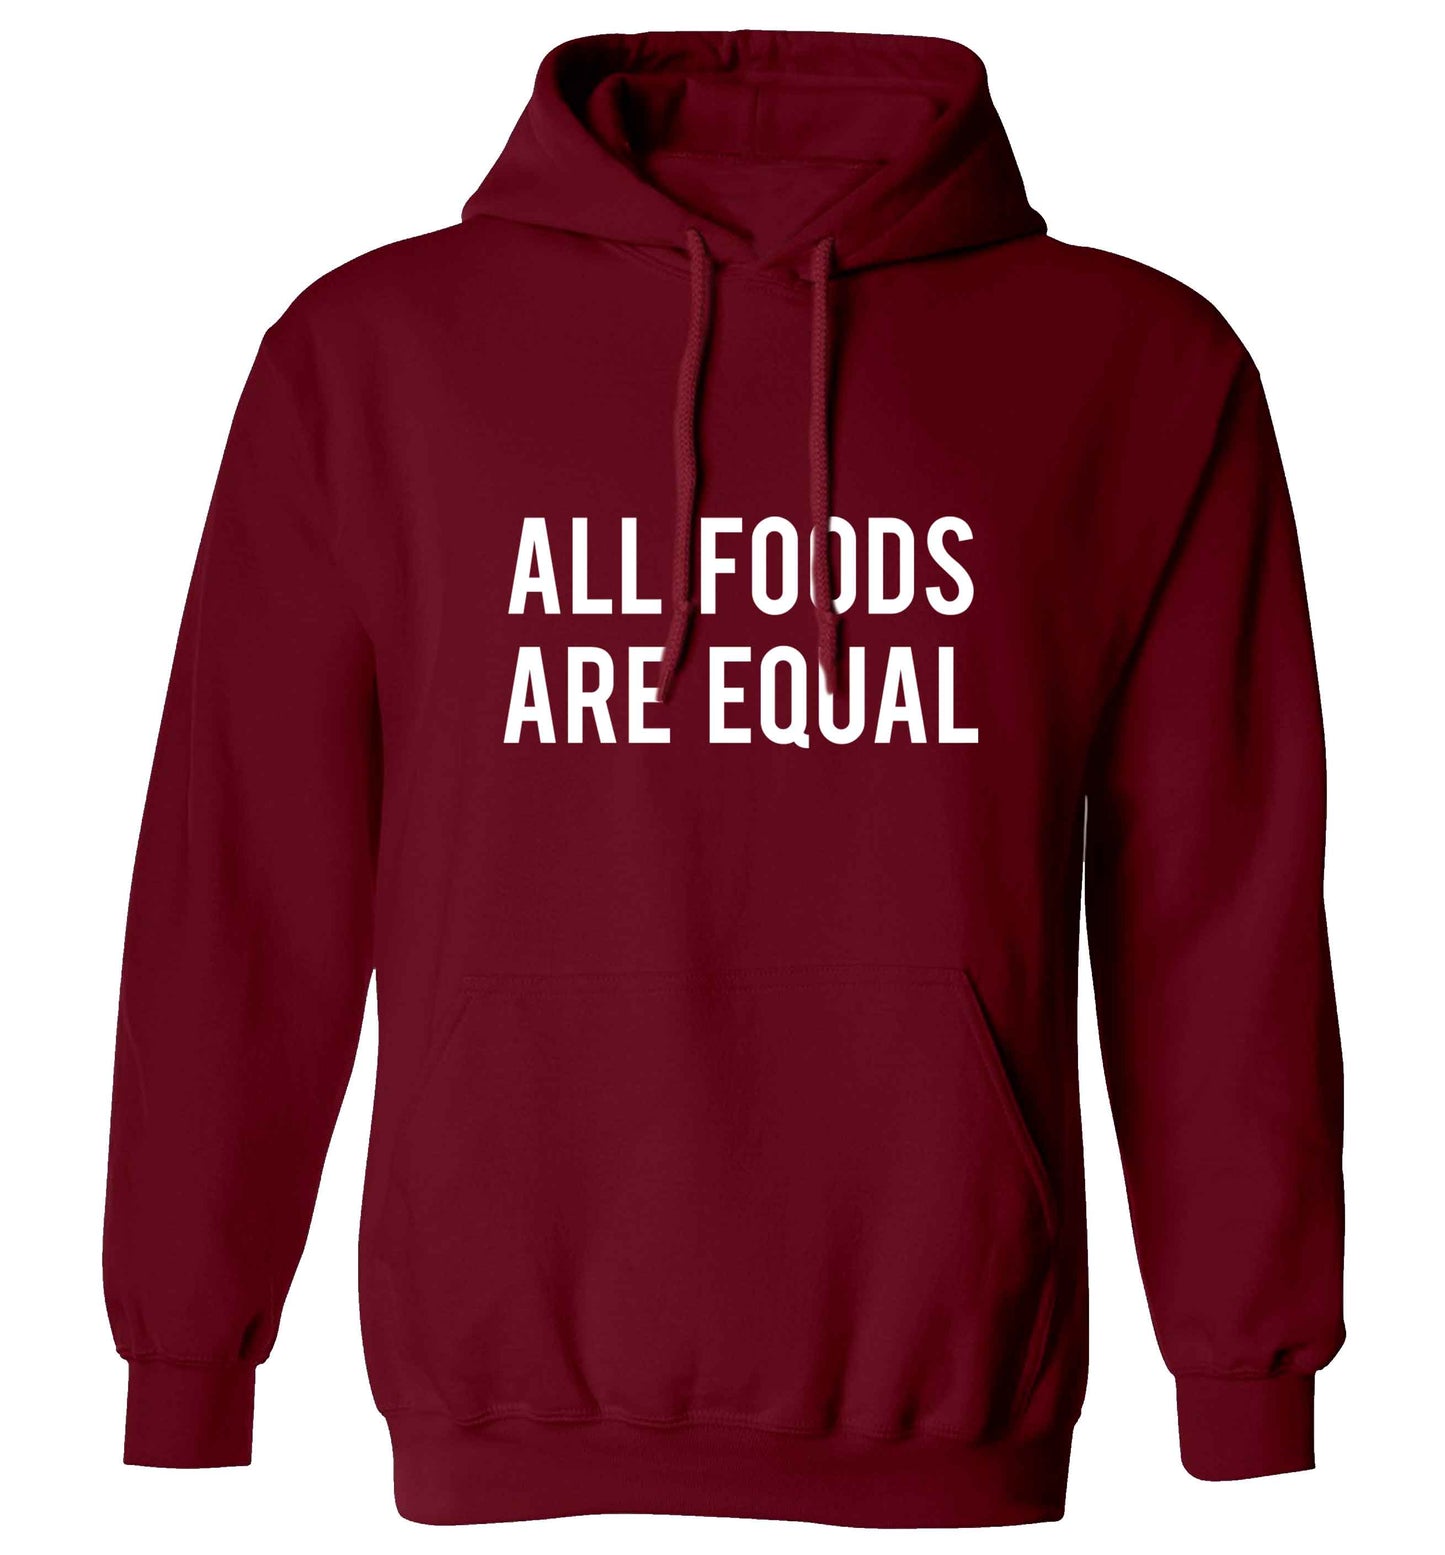 All foods are equal adults unisex maroon hoodie 2XL